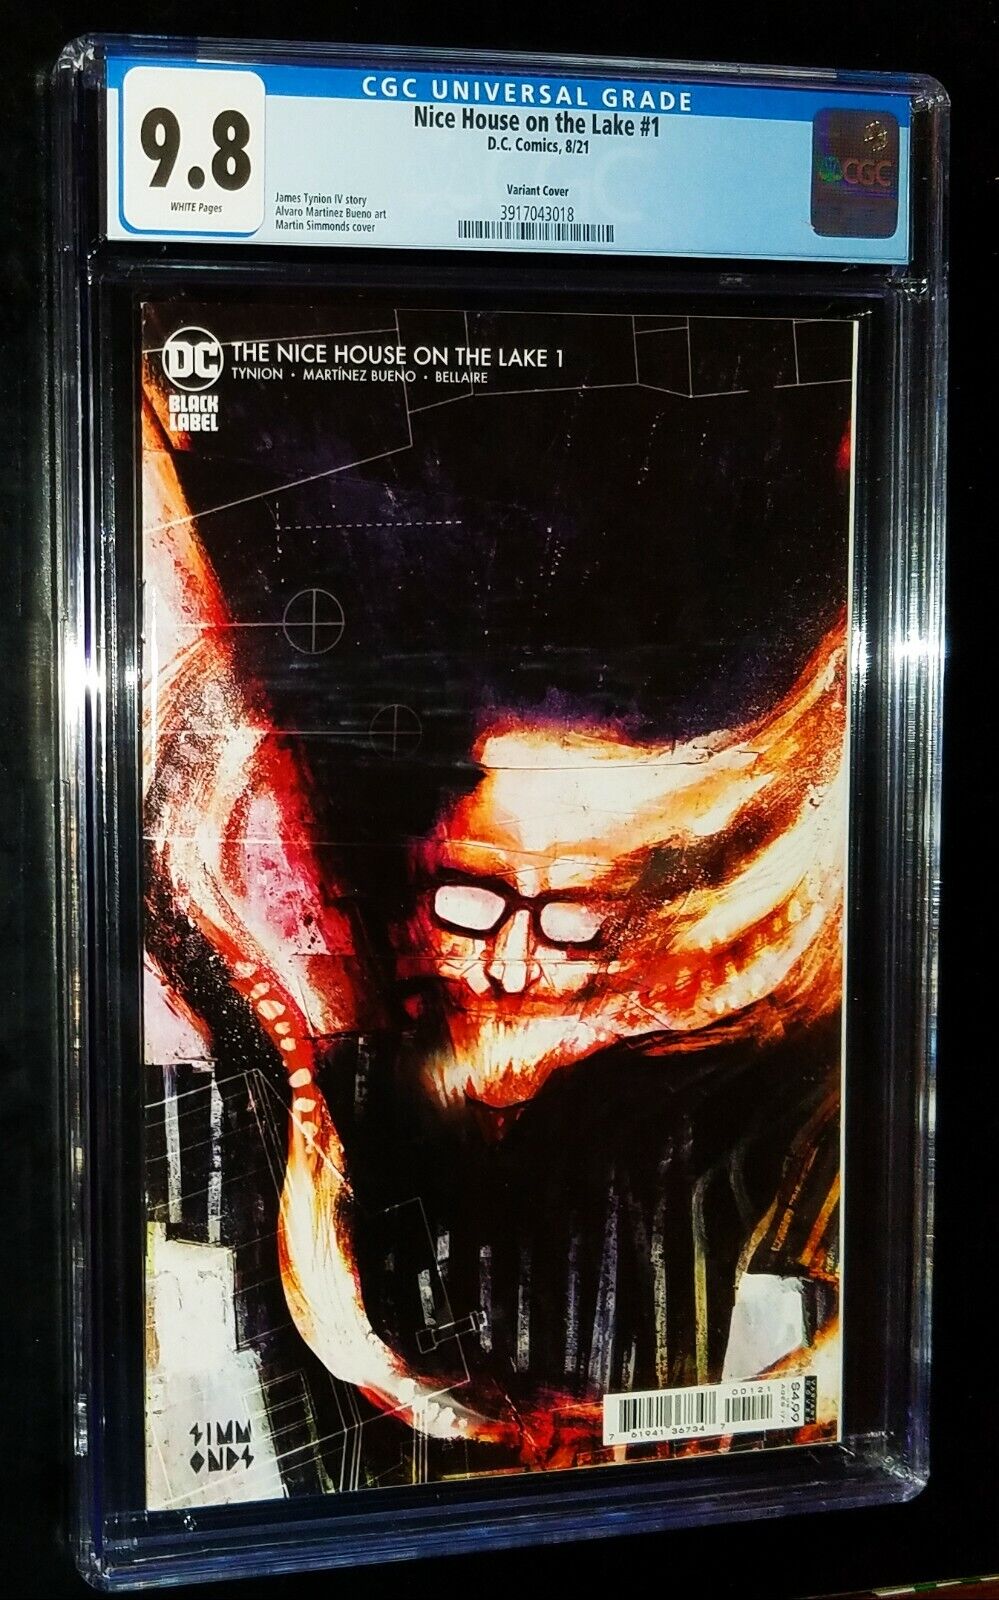 THE NICE HOUSE ON THE LAKE CGC #1 Variant Cover 2021 DC Comics CGC 9.8 NM/MT  06